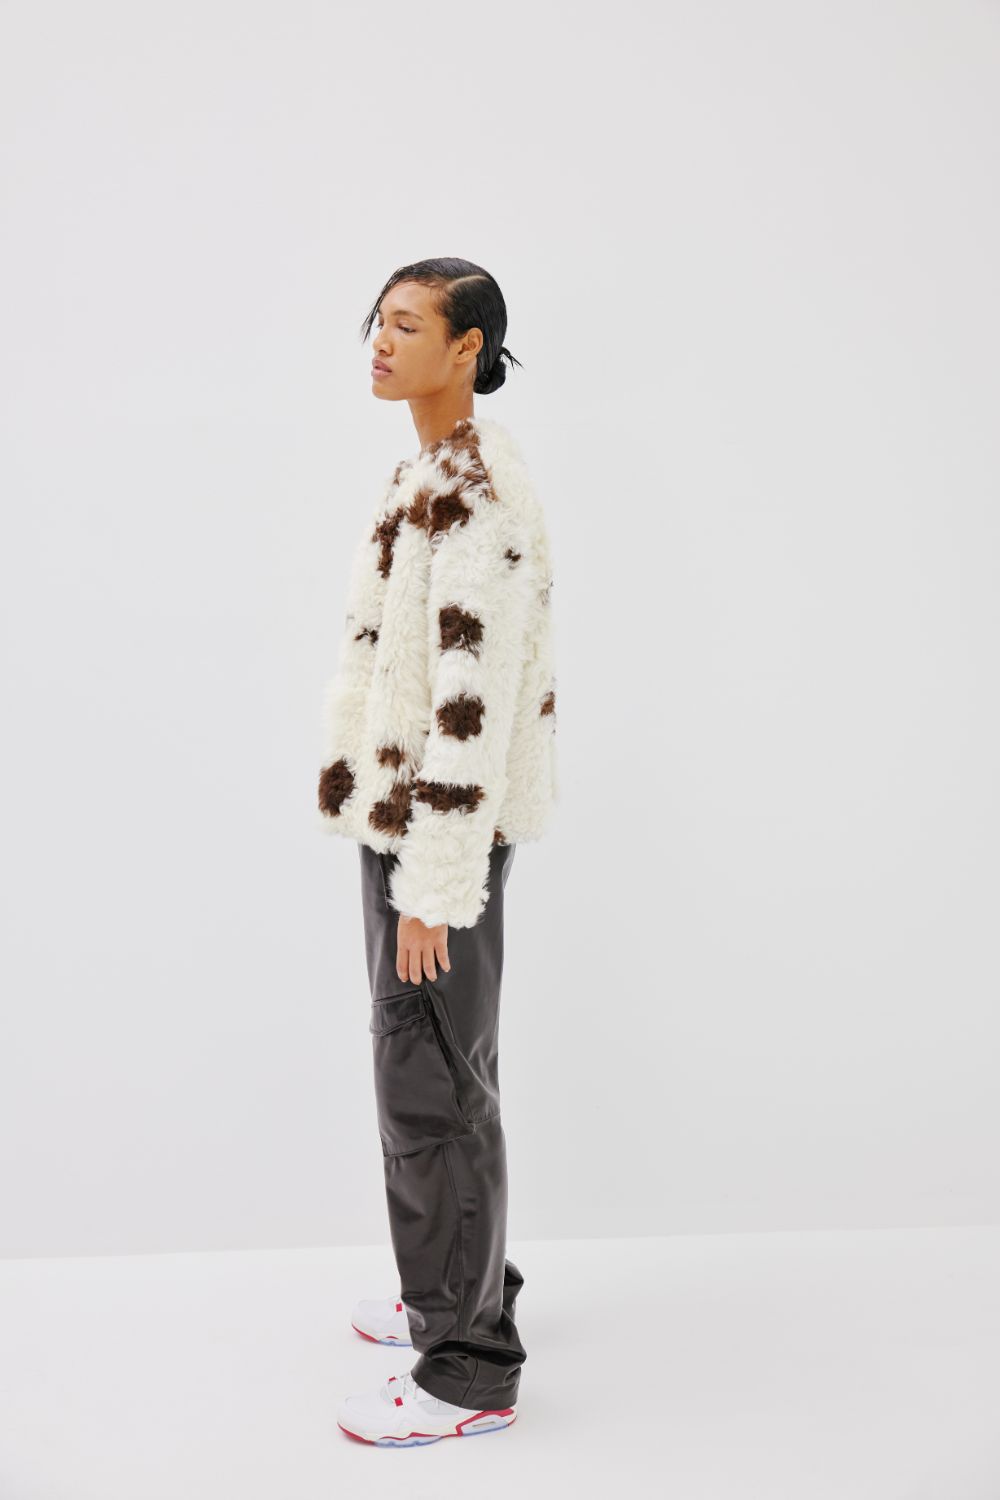 "New Baby" Shearling Fur Jacket - Brown and White Naturally Dotted